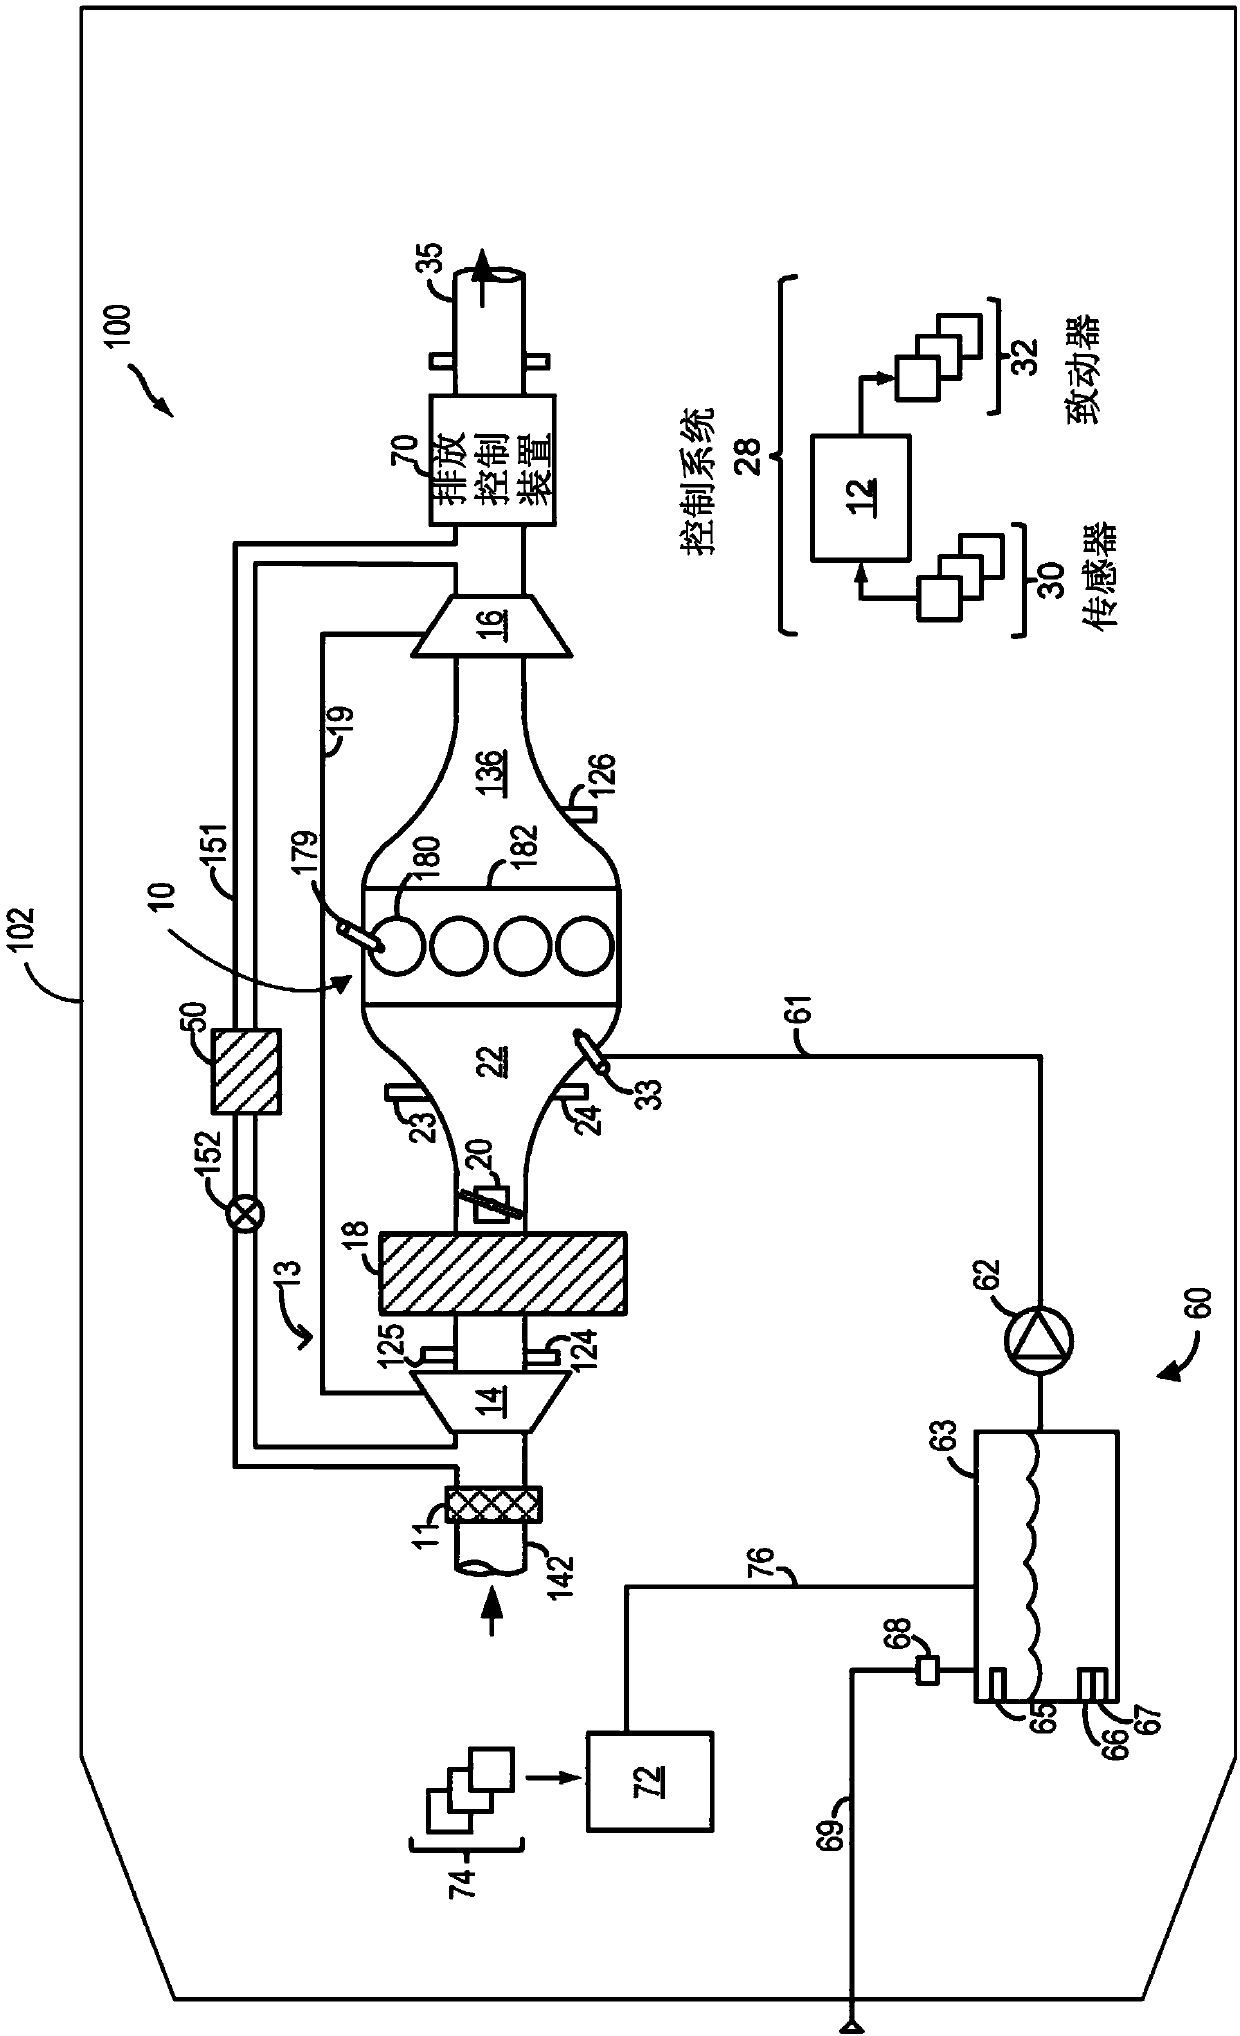 System and method for extracting water from a mechanical air conditioning system for water injection